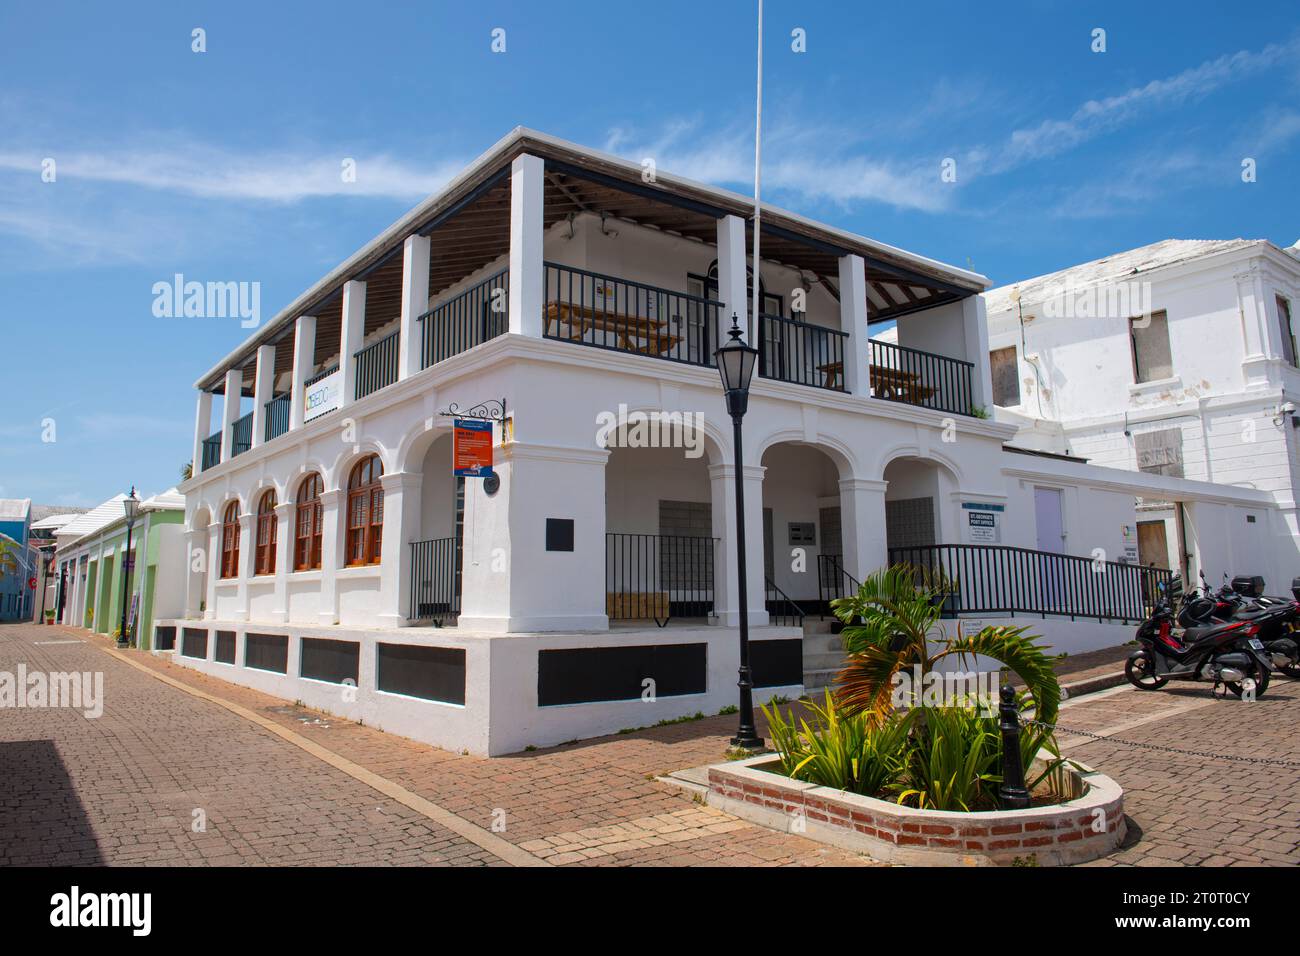 George's Post Office on Water Street in town center of St. George's in Bermuda. Historic Town of St. George is a World Heritage Site since 2000. Stock Photo